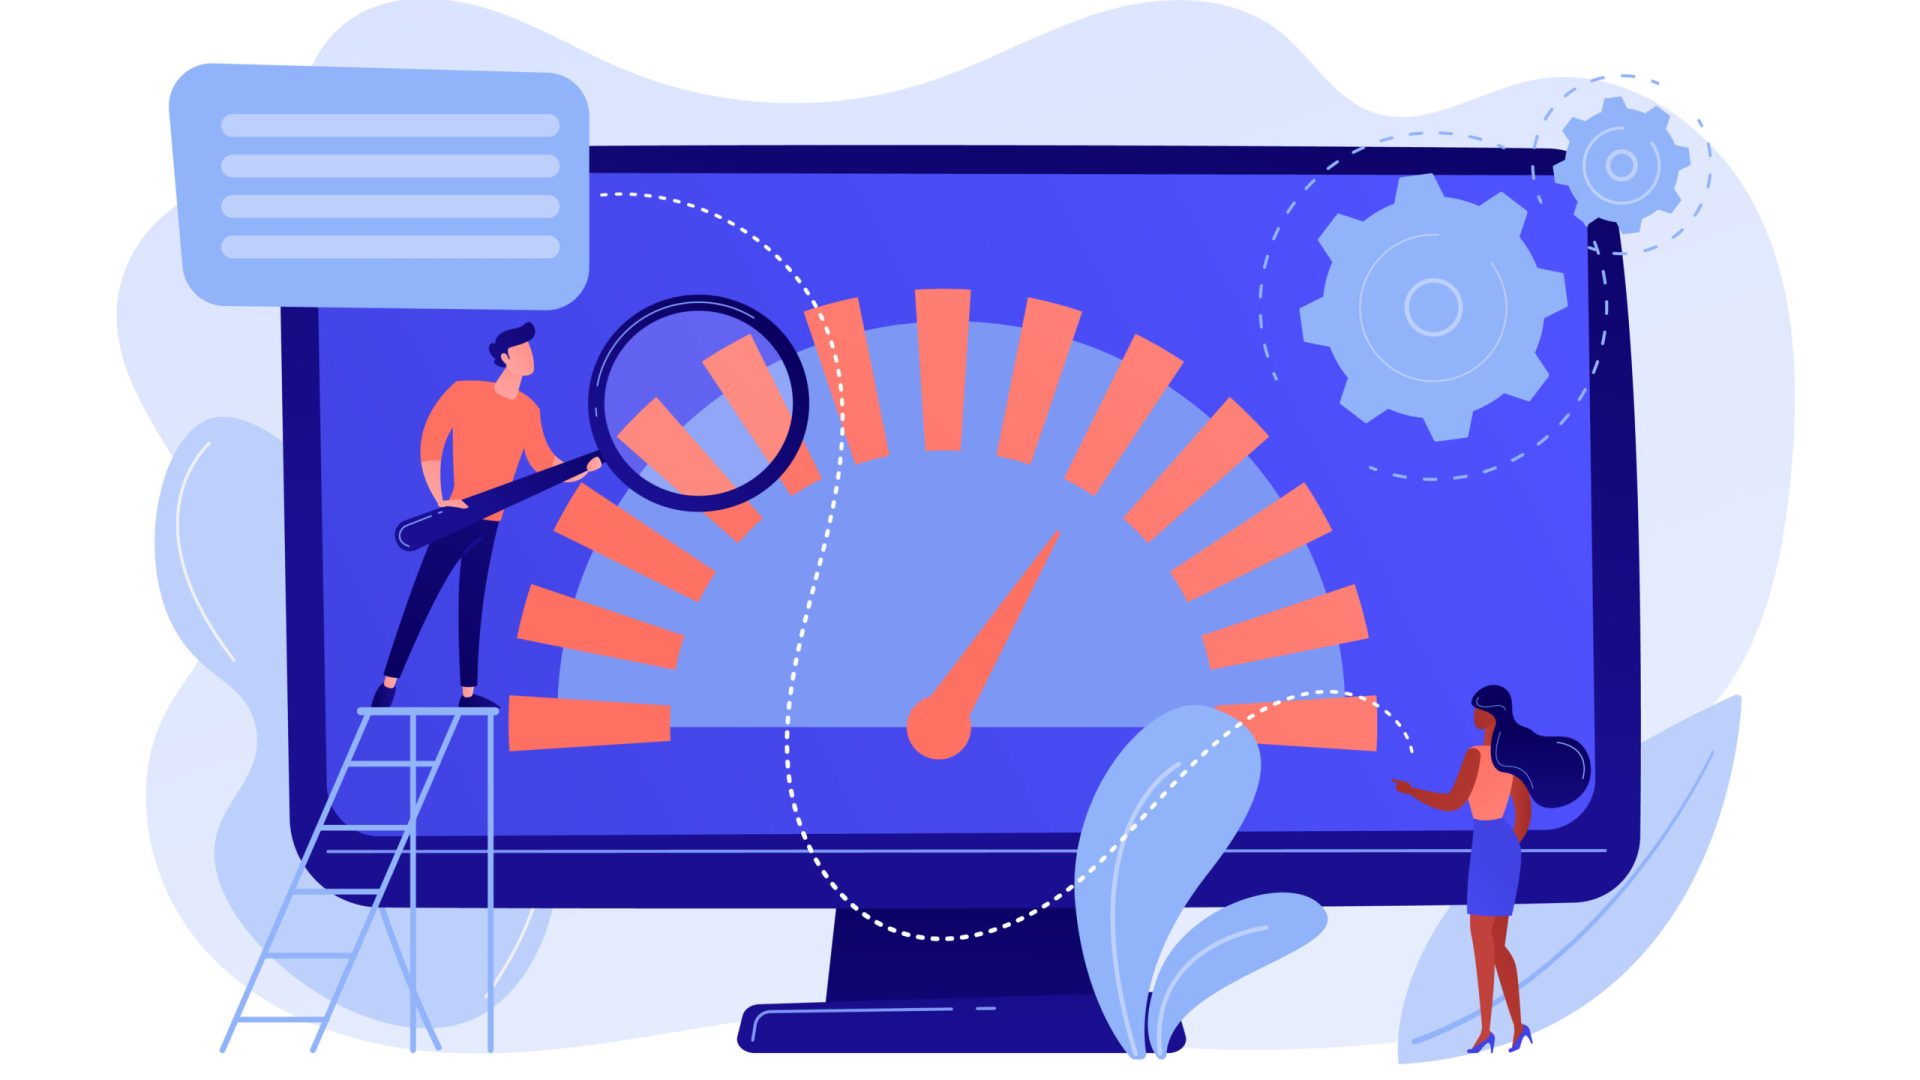 Tiny business people look at product performance indicator. Benchmark testing, benchmarking software, product performance indicator concept. Pinkish coral bluevector isolated illustration